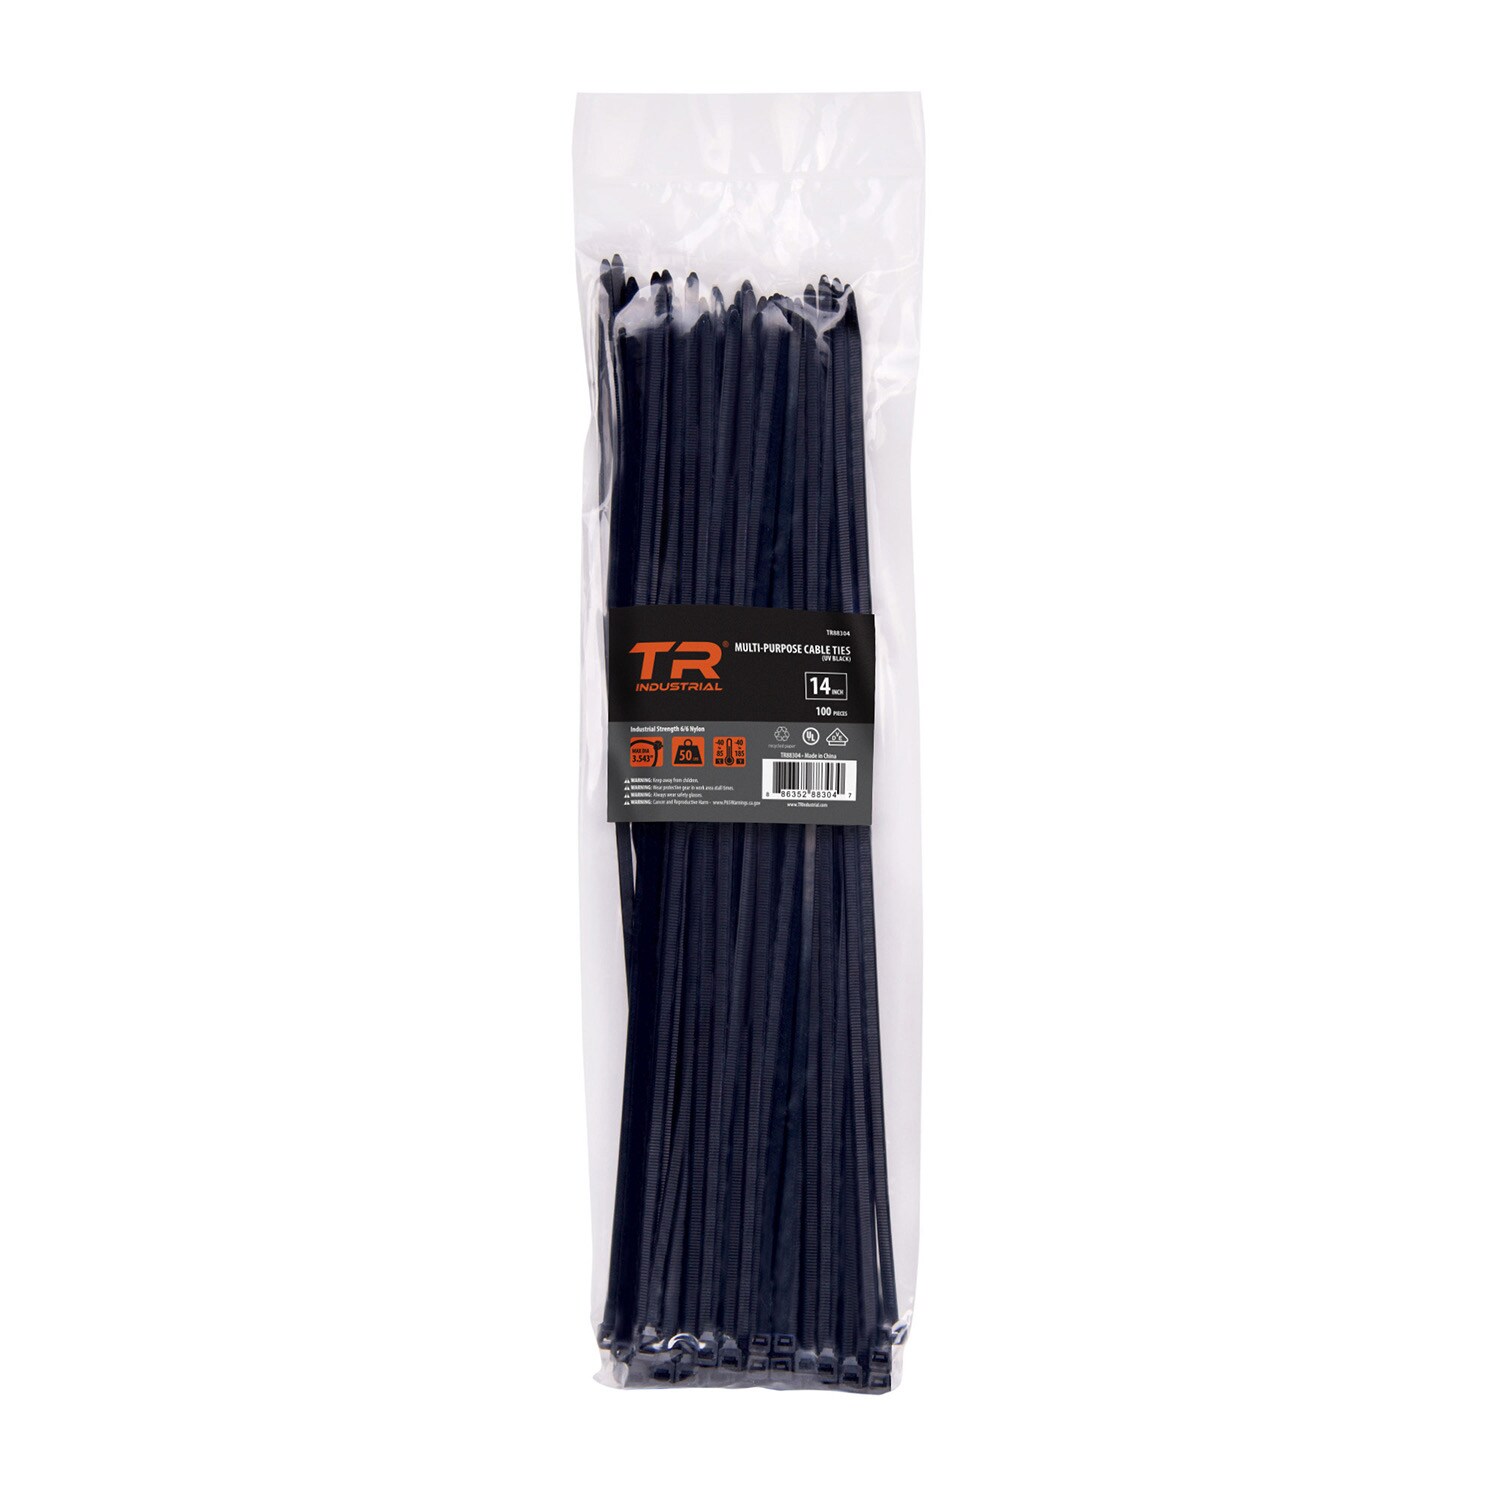 200 Details about   Tekton Cable Zip Ties Two Hundred Piece Assorted Lengths 